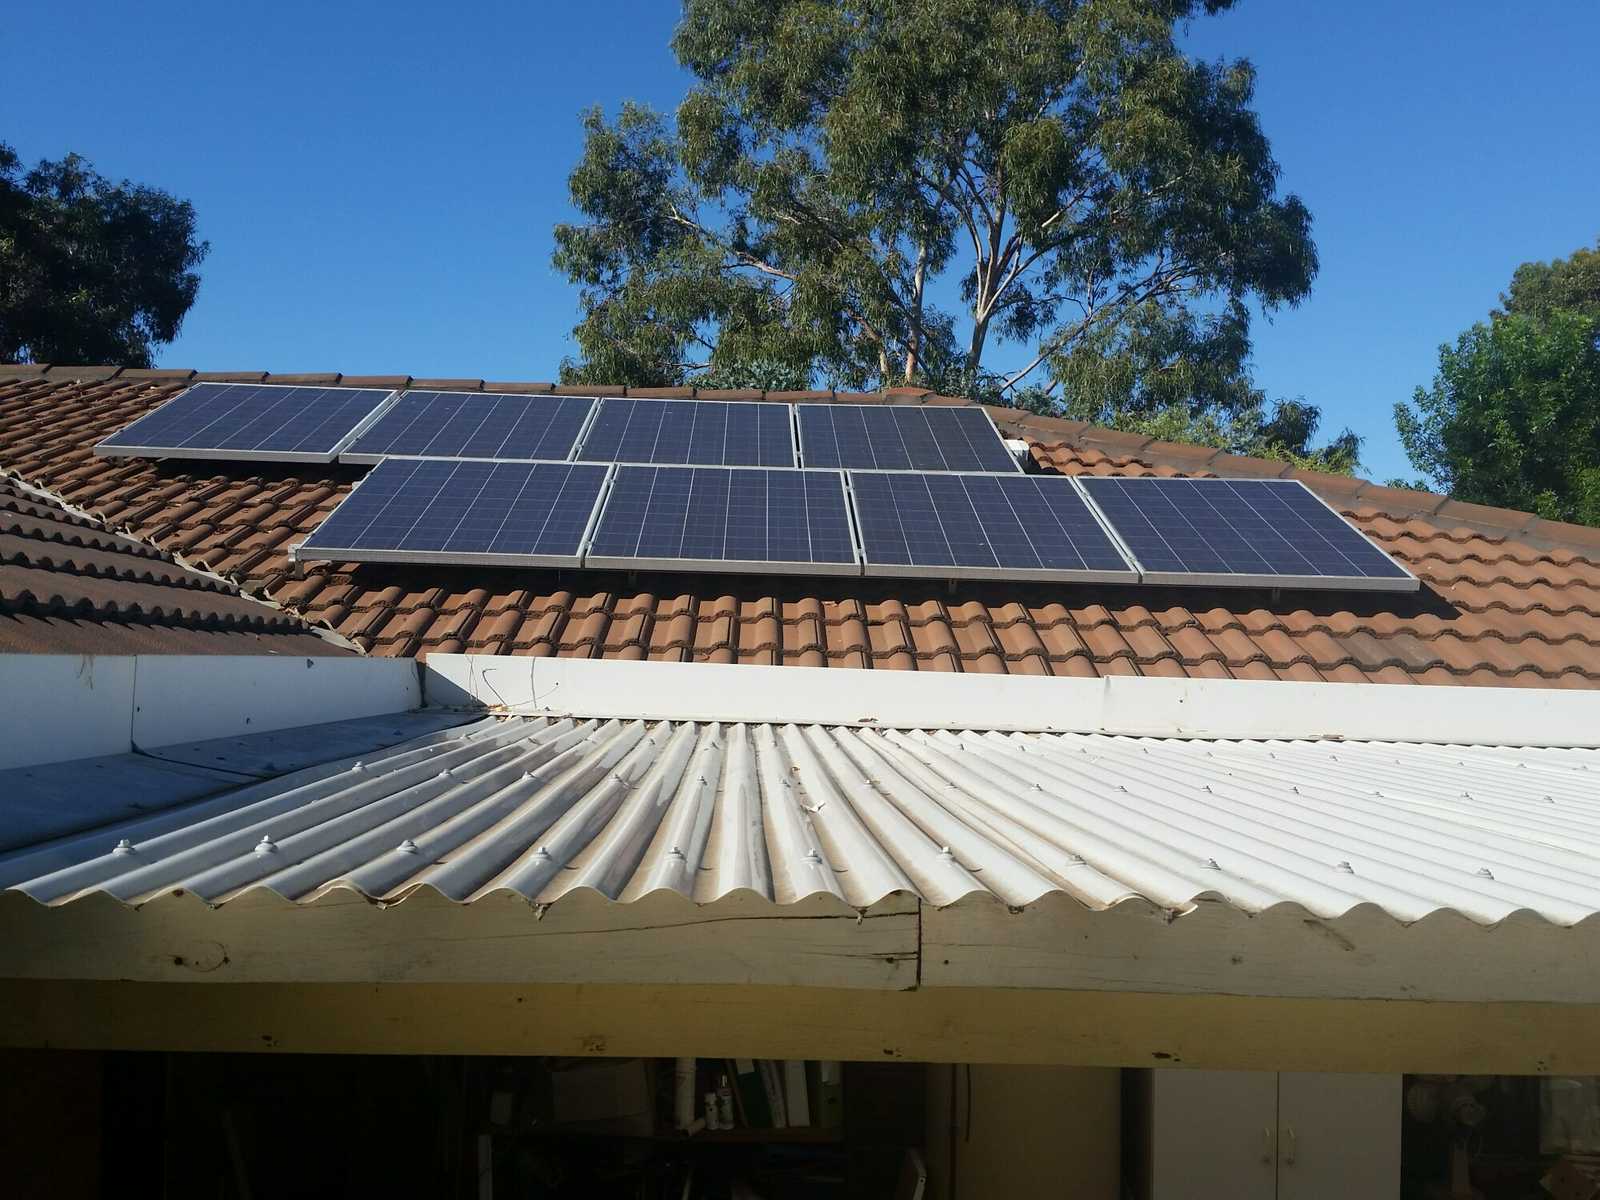 Rooftop solar panels on a tiled roof